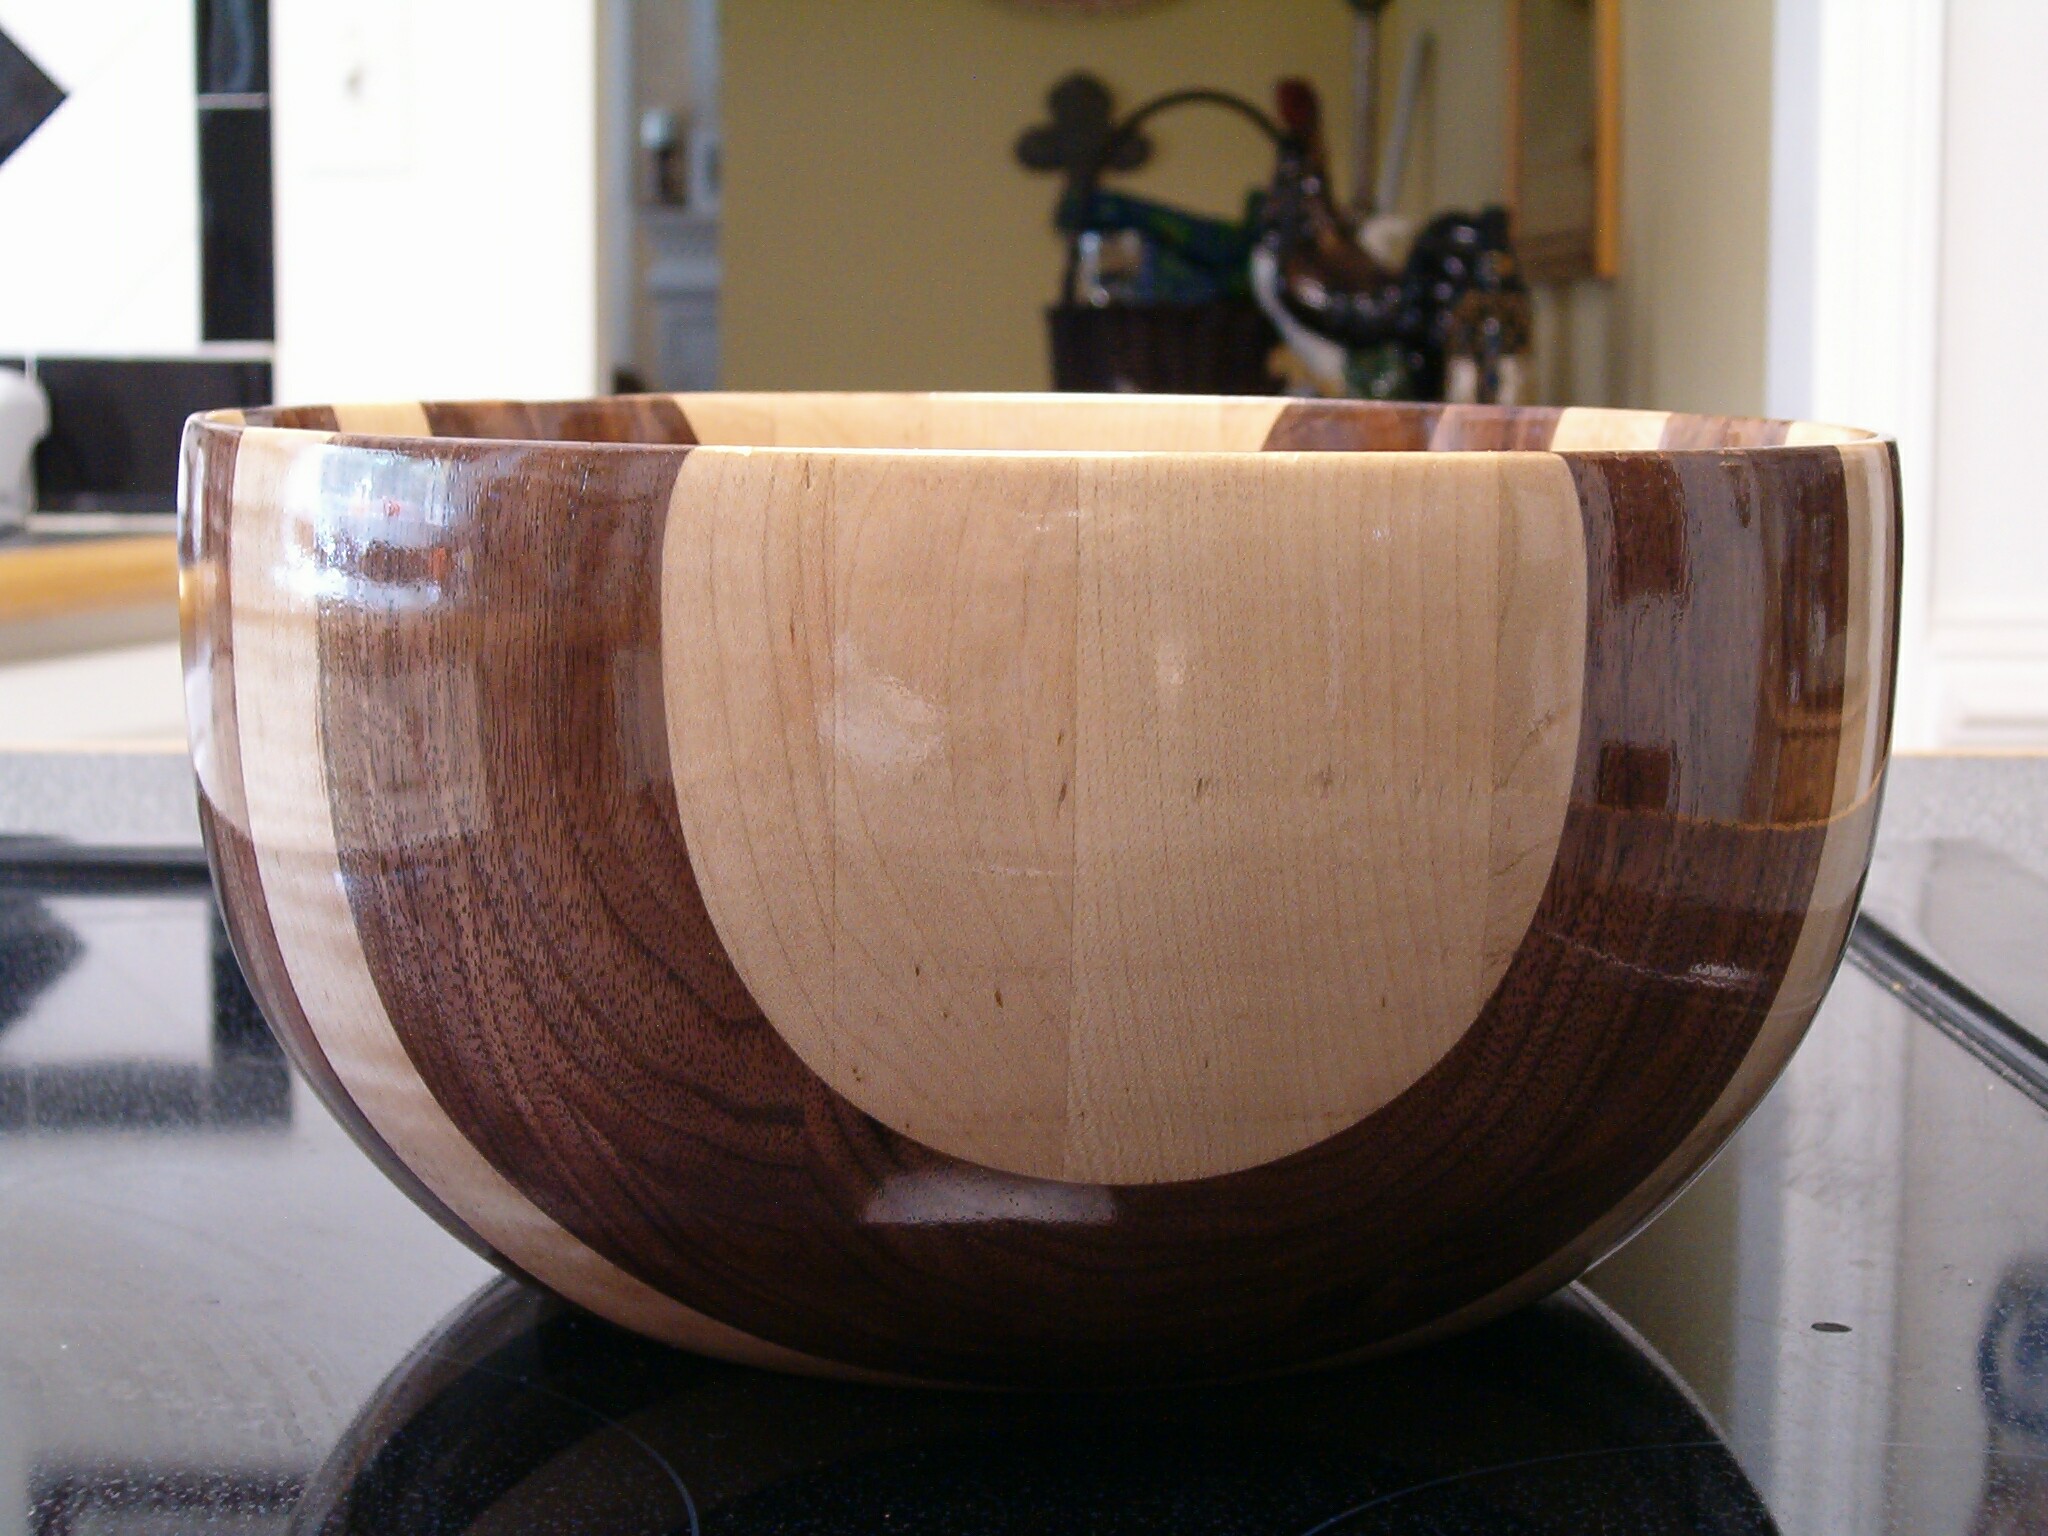 My first bowls